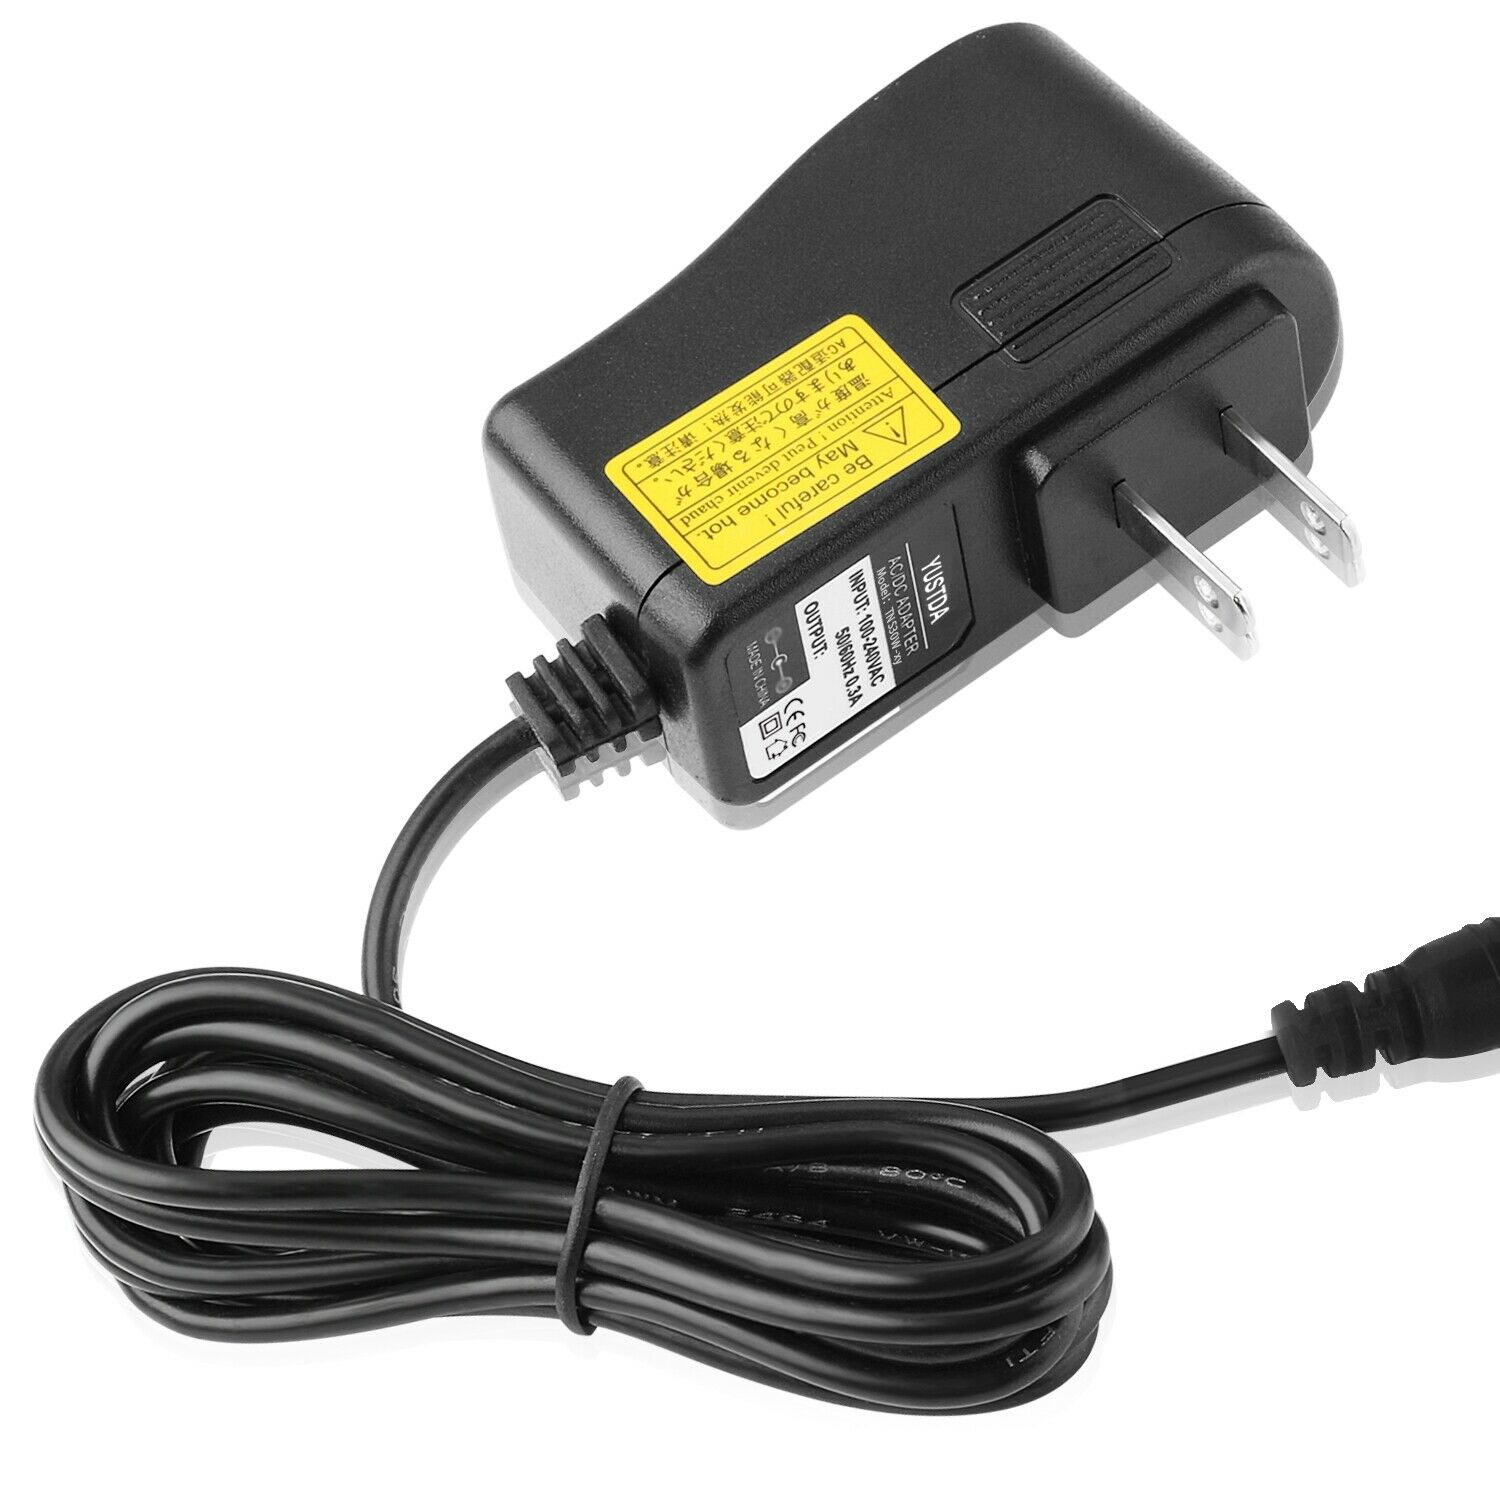 Switch Sagemcom Charger 12V Adapter 191287197 NBS30E120250VU Connection Split/Duplication: 1:2 Ty - Click Image to Close